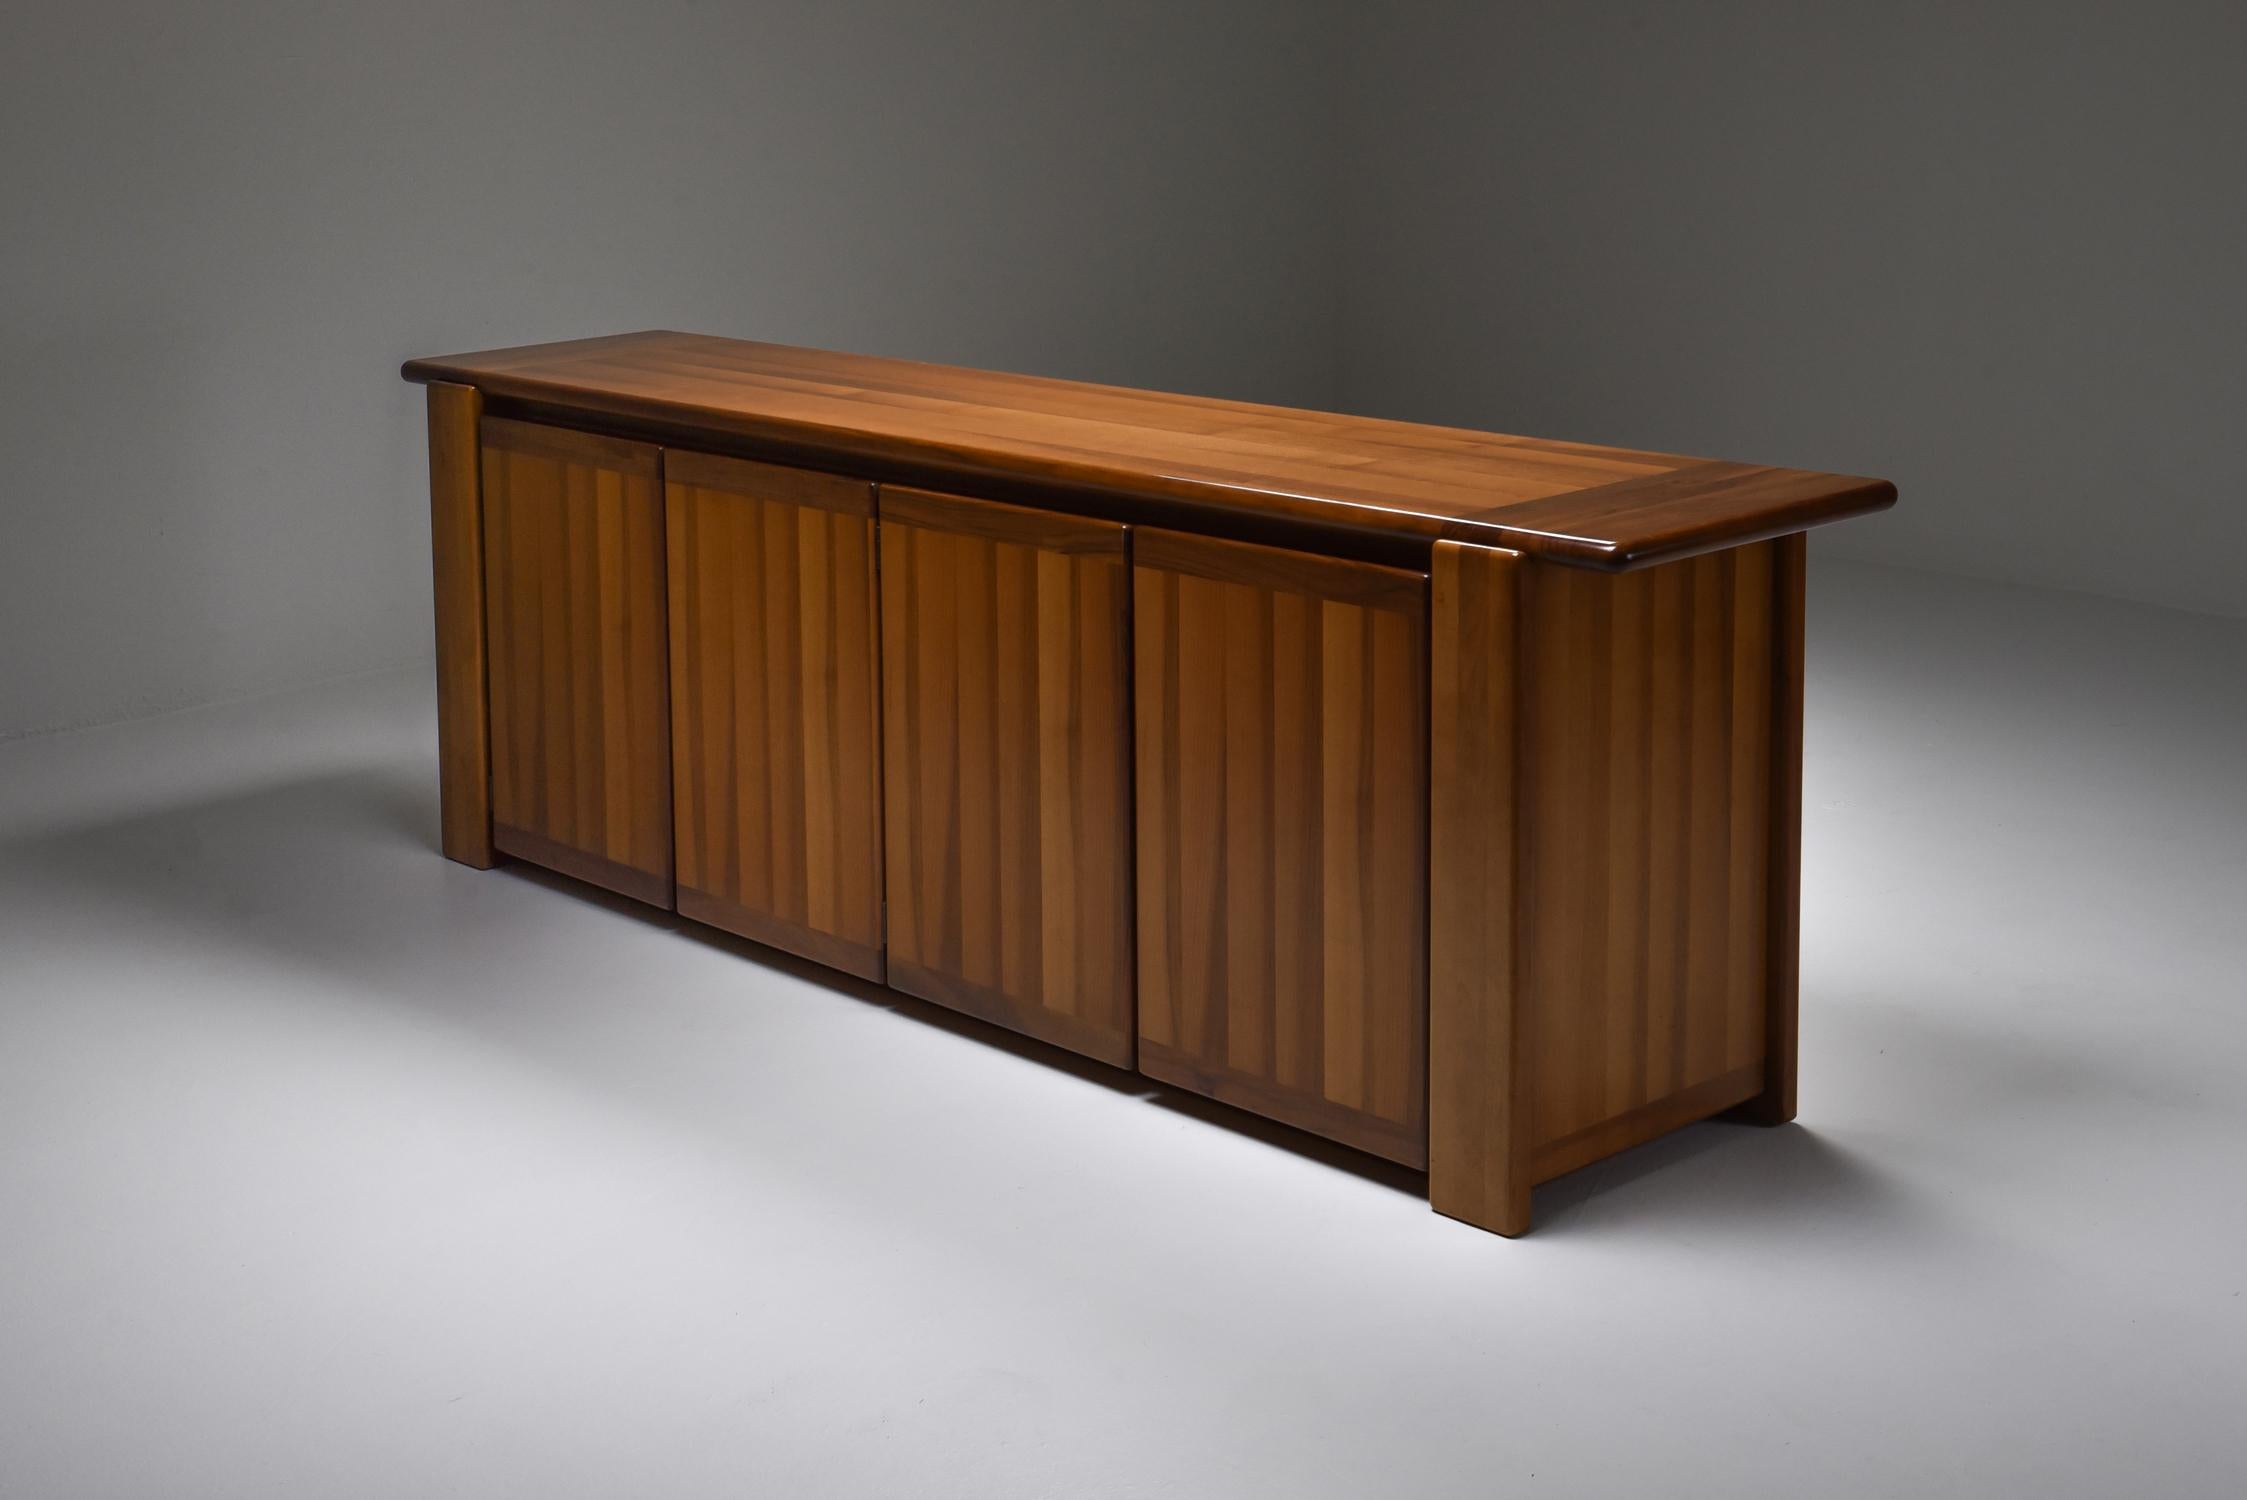 Mario Marenco for Mobilgirgi, 'Sapporo' sideboard, walnut, Italy, 1970s 

Solid walnut 'Sapporo' credenza in walnut by Mario Marenco.
The walnut wood is placed in different directions, creating a graphic play in tones.

A fabulous storage piece